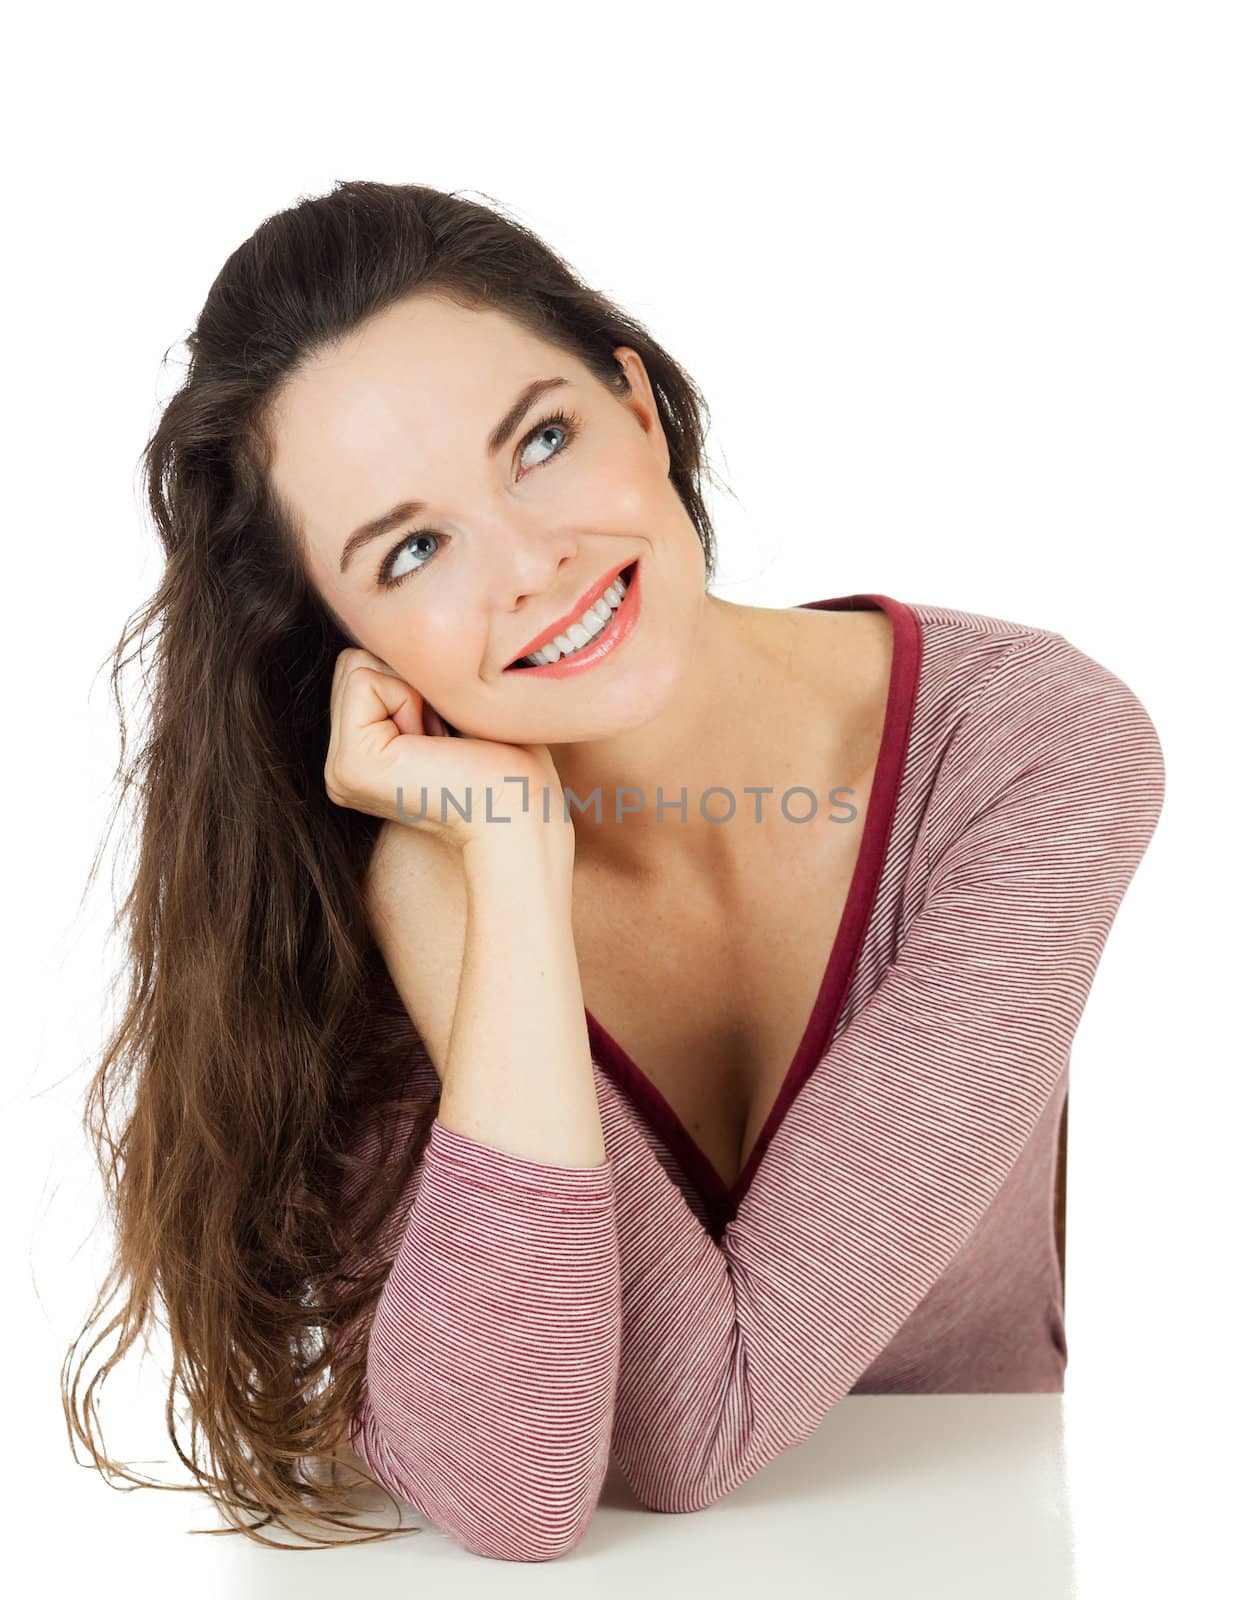 Isolated portrait of an attractive young woman smiling and looking at copyspace.